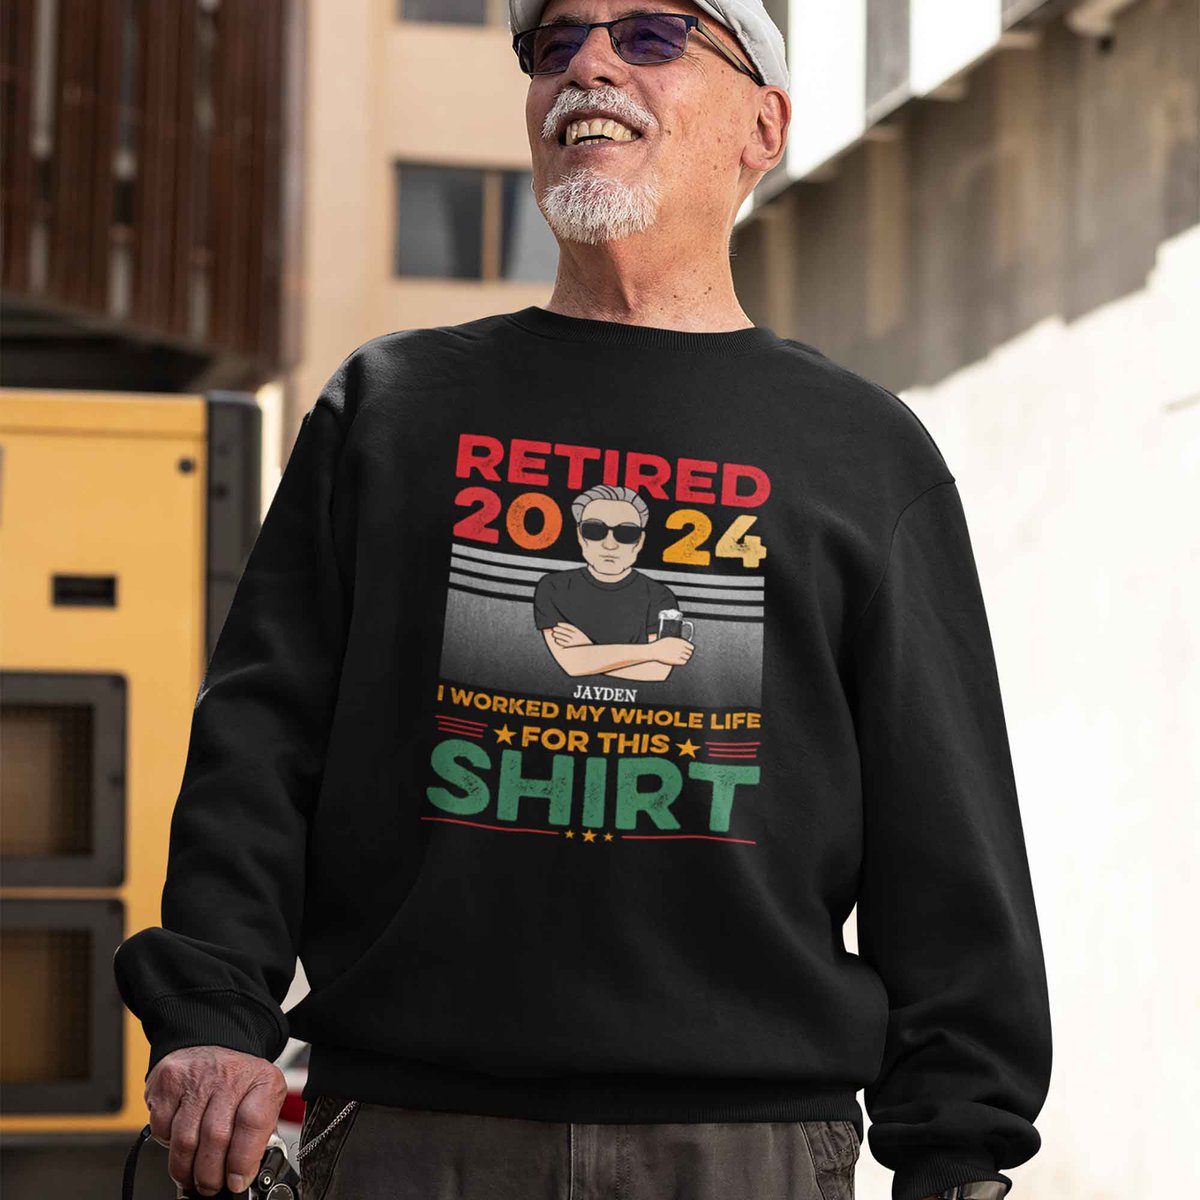 Excited to share the latest addition to my #etsy shop: Personalized Retired Shirt, Retired 2024 I Worked My Whole Life For This Shirt, Retirement Gifts For Him and Her, Gift for Retired etsy.me/3Uri0Ey #anniversary #christmas #athletic #organiccotton #retiredshirts